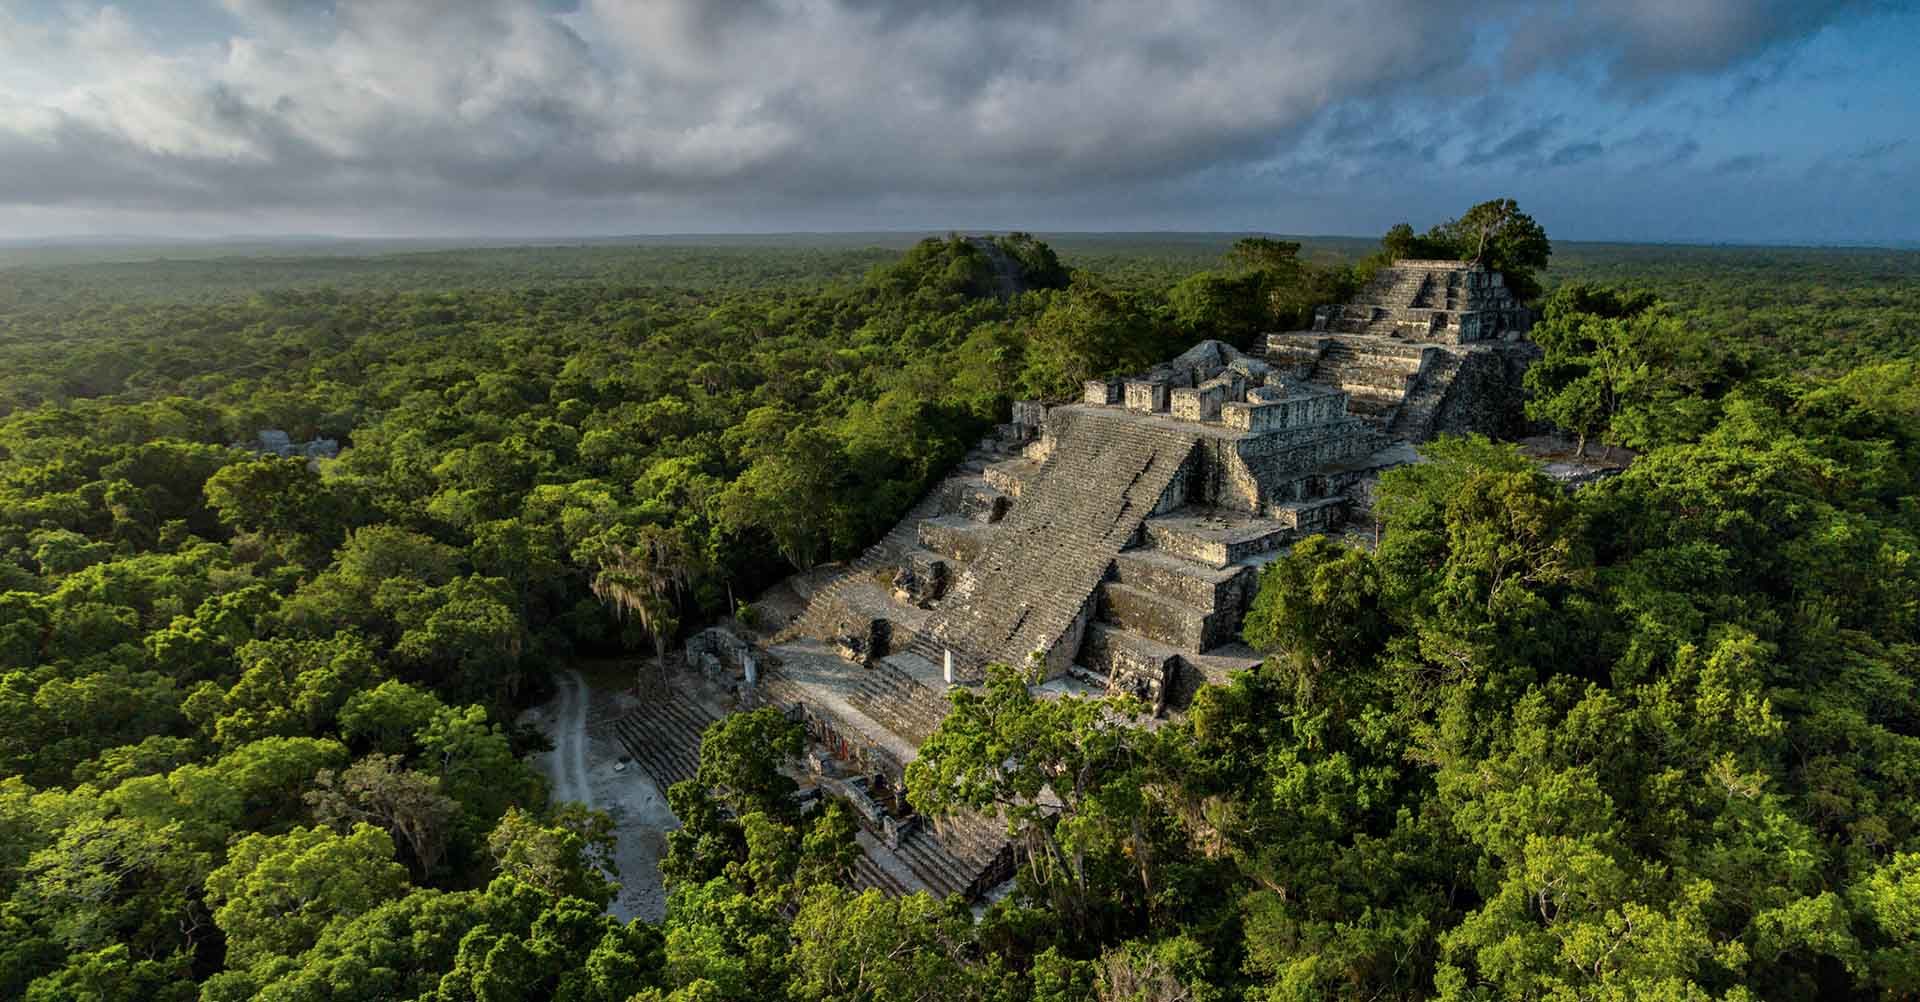 Ancient Maya City and Protected Tropical Forests of Calakmul